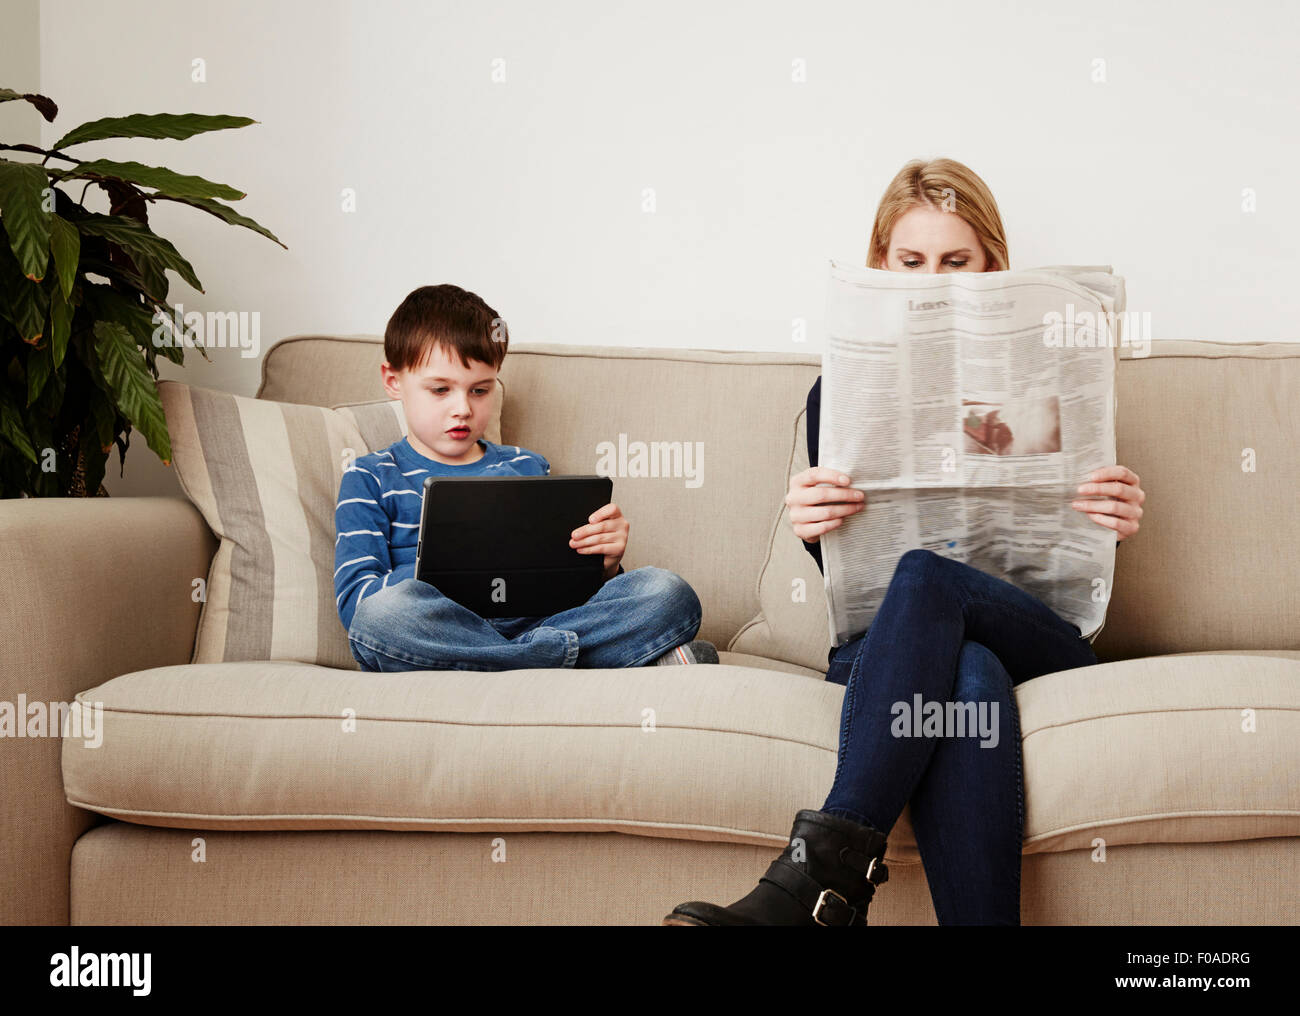 Young boy using digital tablet, mother reading newspaper Stock Photo